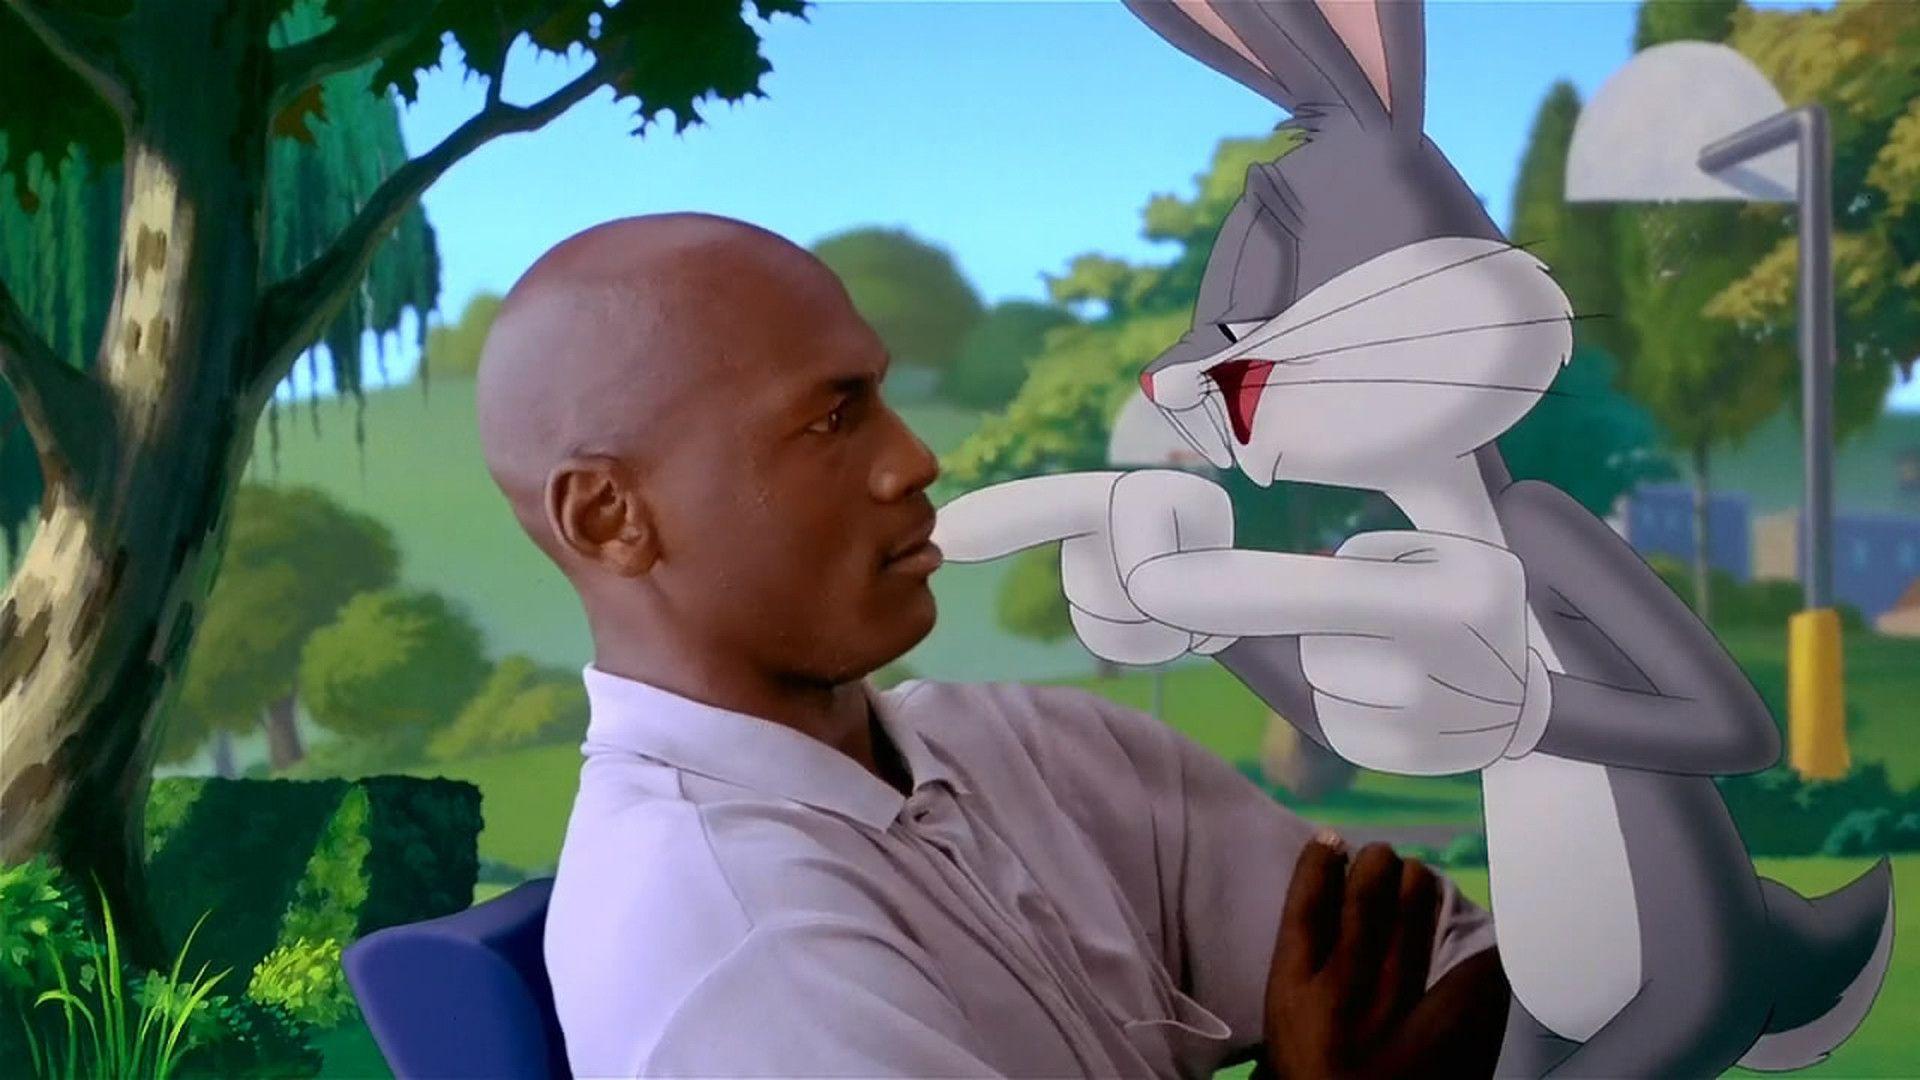 Space Jam movie trailer, cast, posters and HD wallpaper